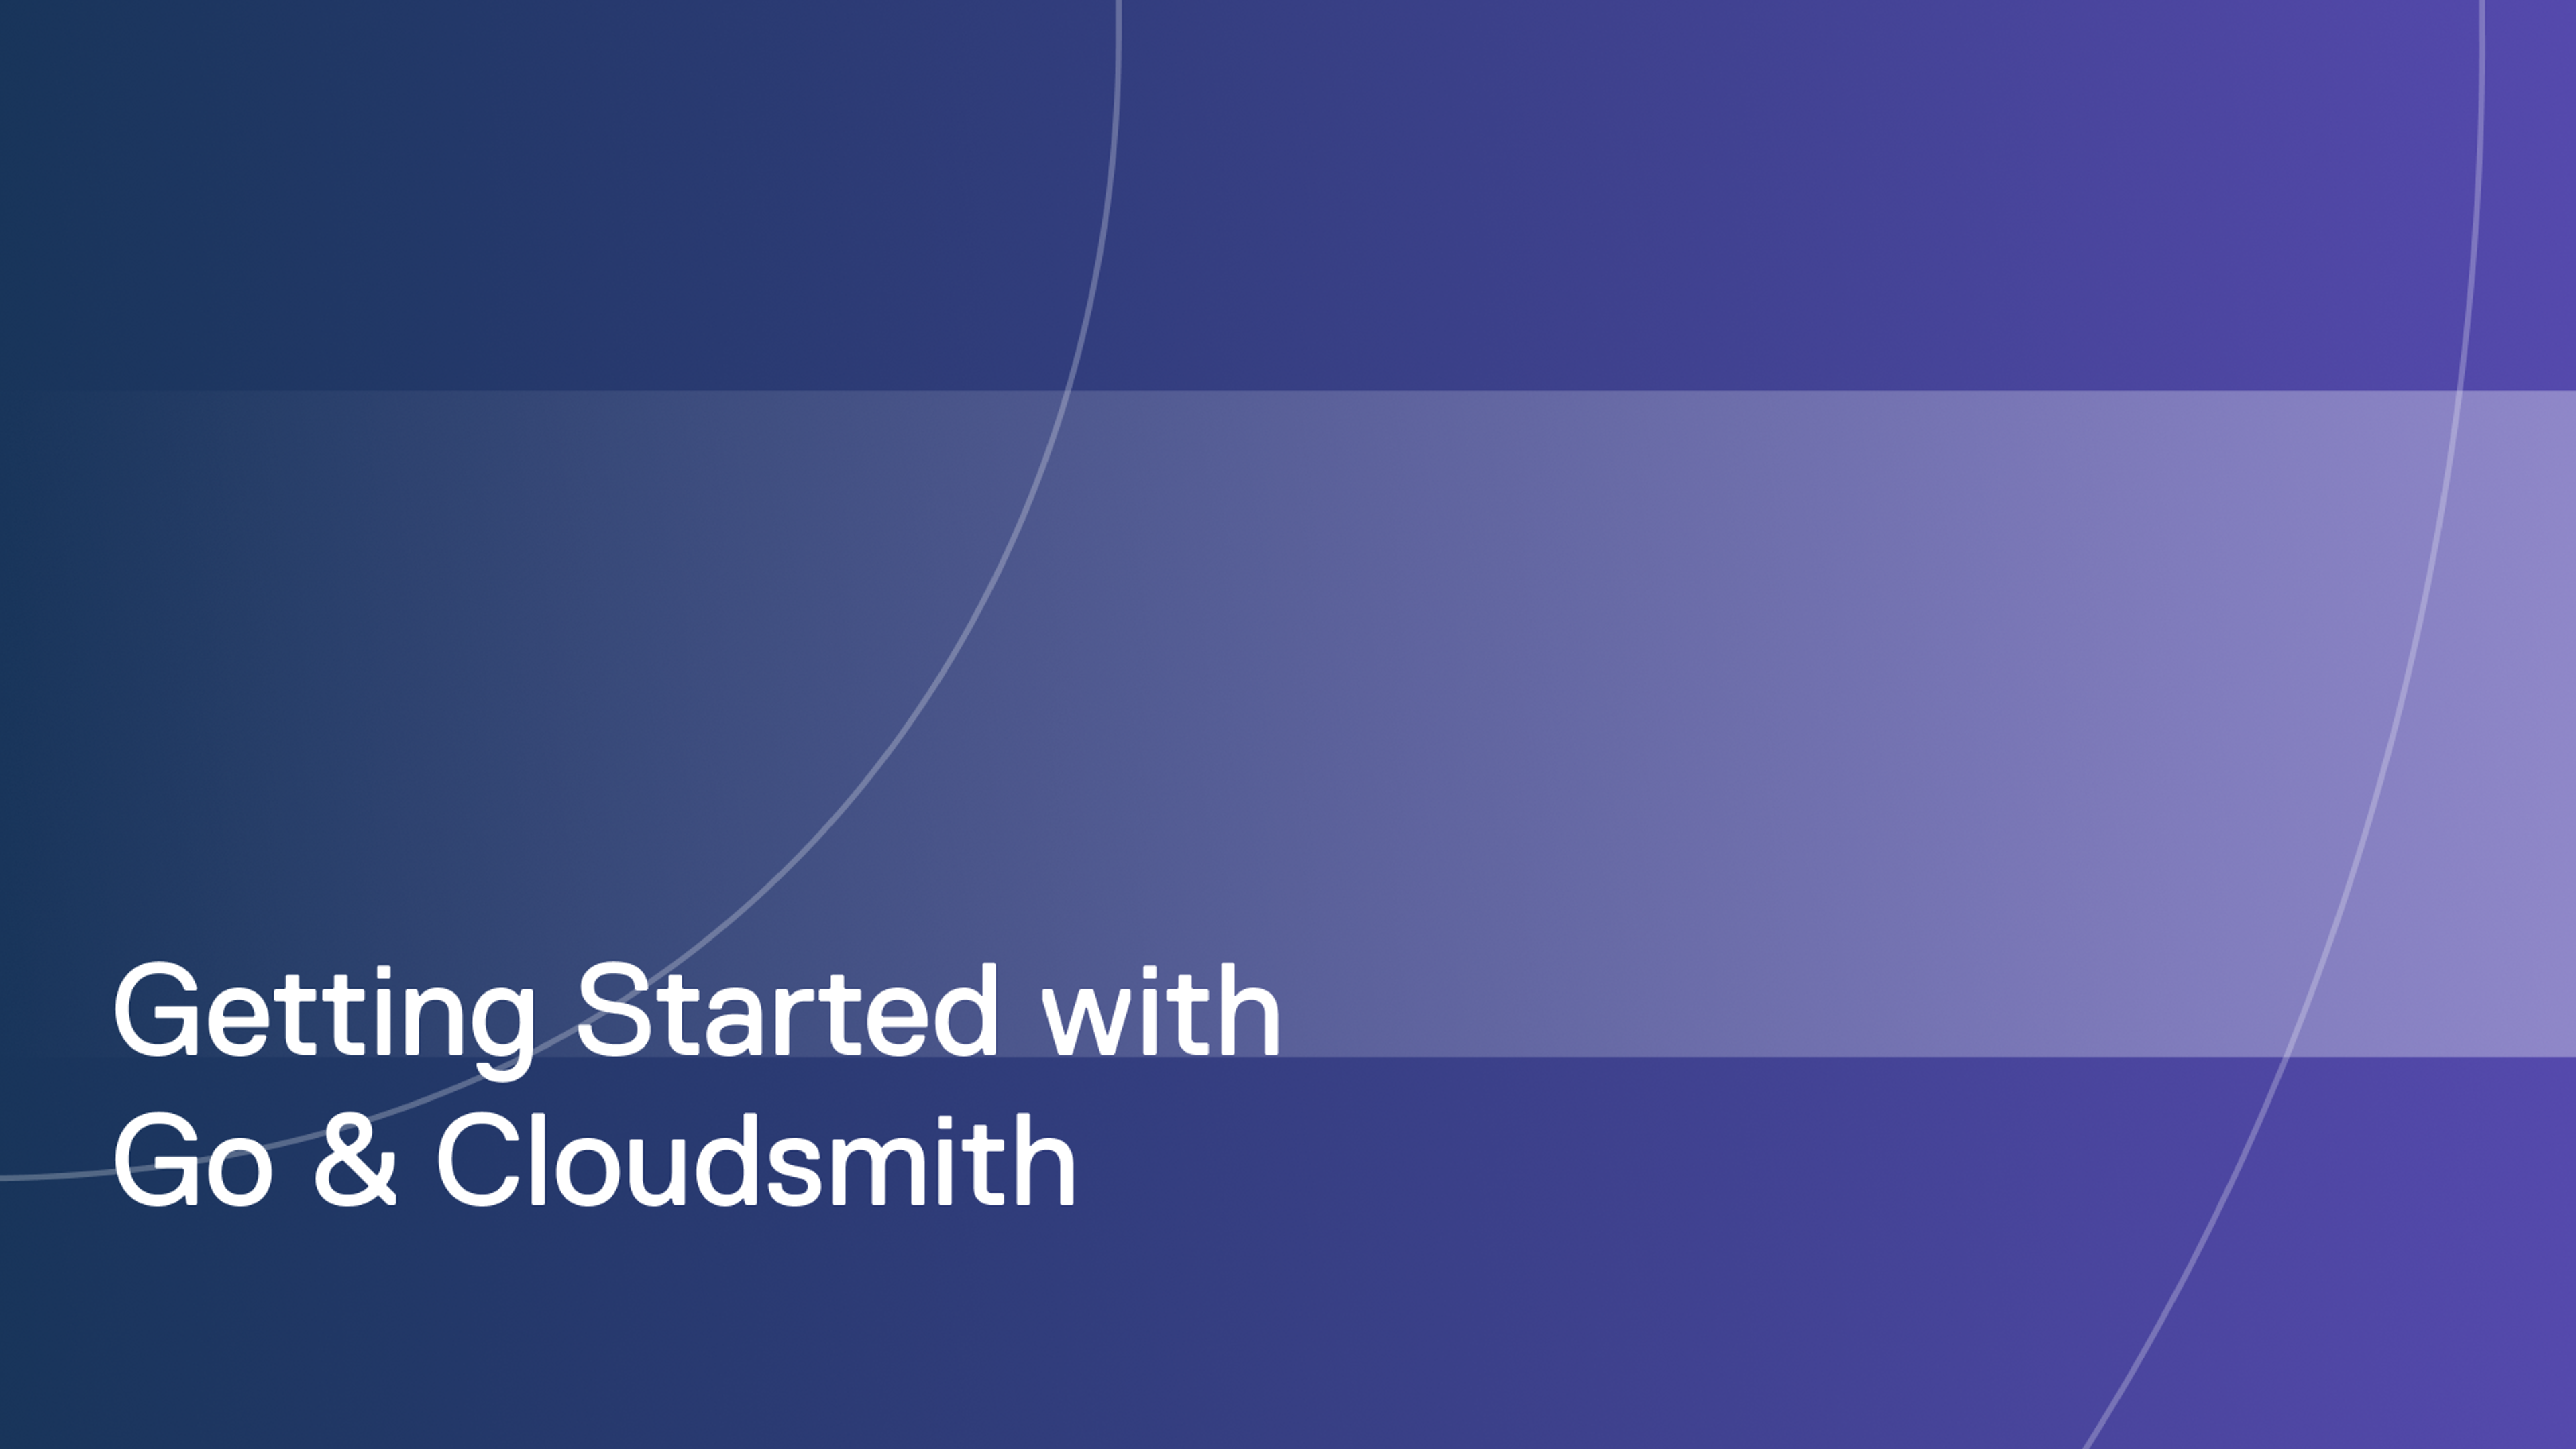 Getting started with Go and Cloudsmith